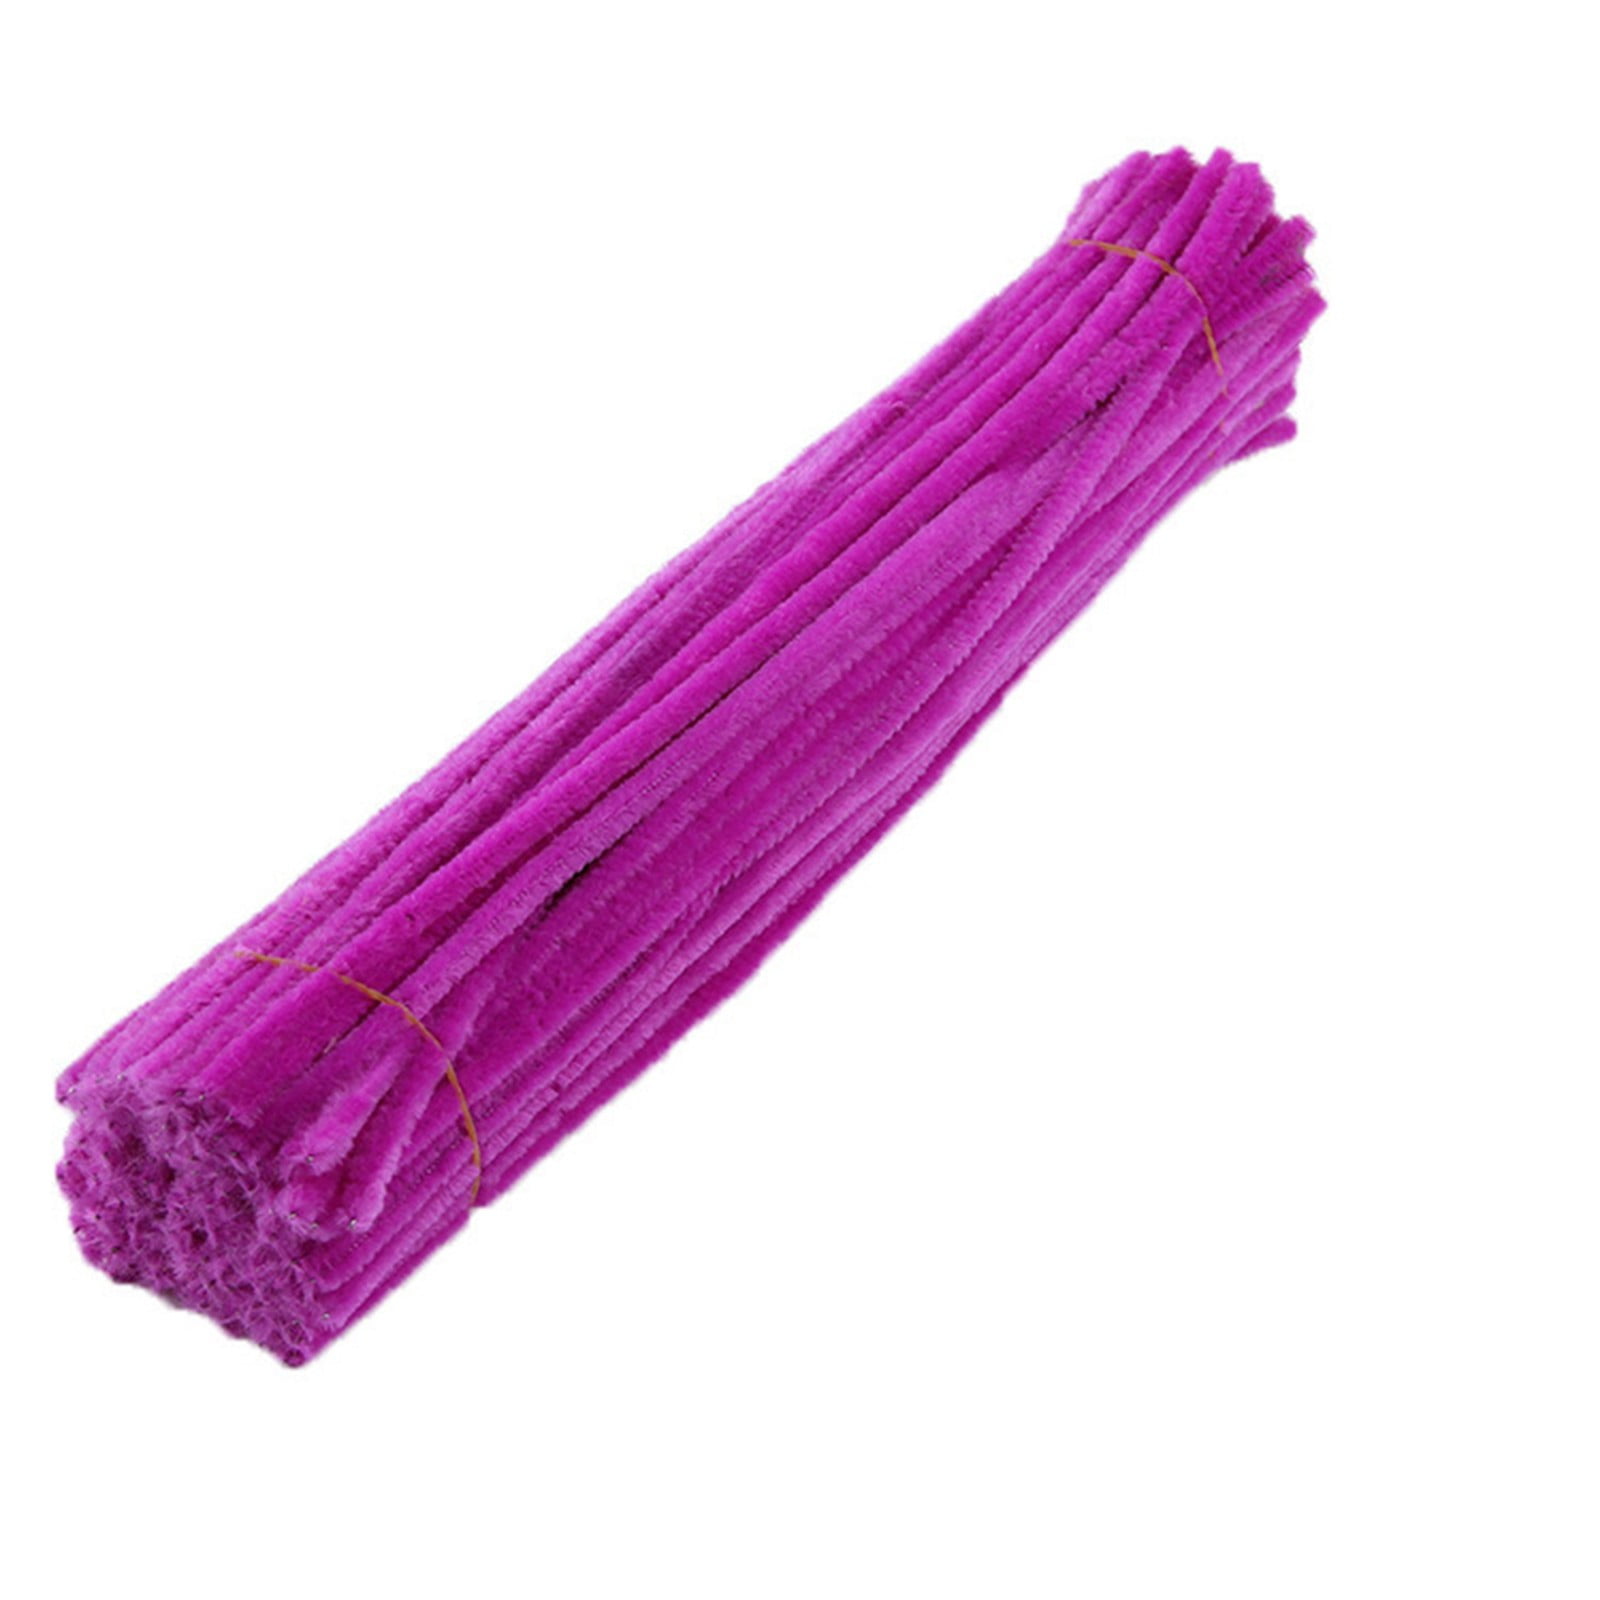 1000 Pcs Pipe Cleaners Bulk Chenille Stems Fuzzy Sticks for Kids